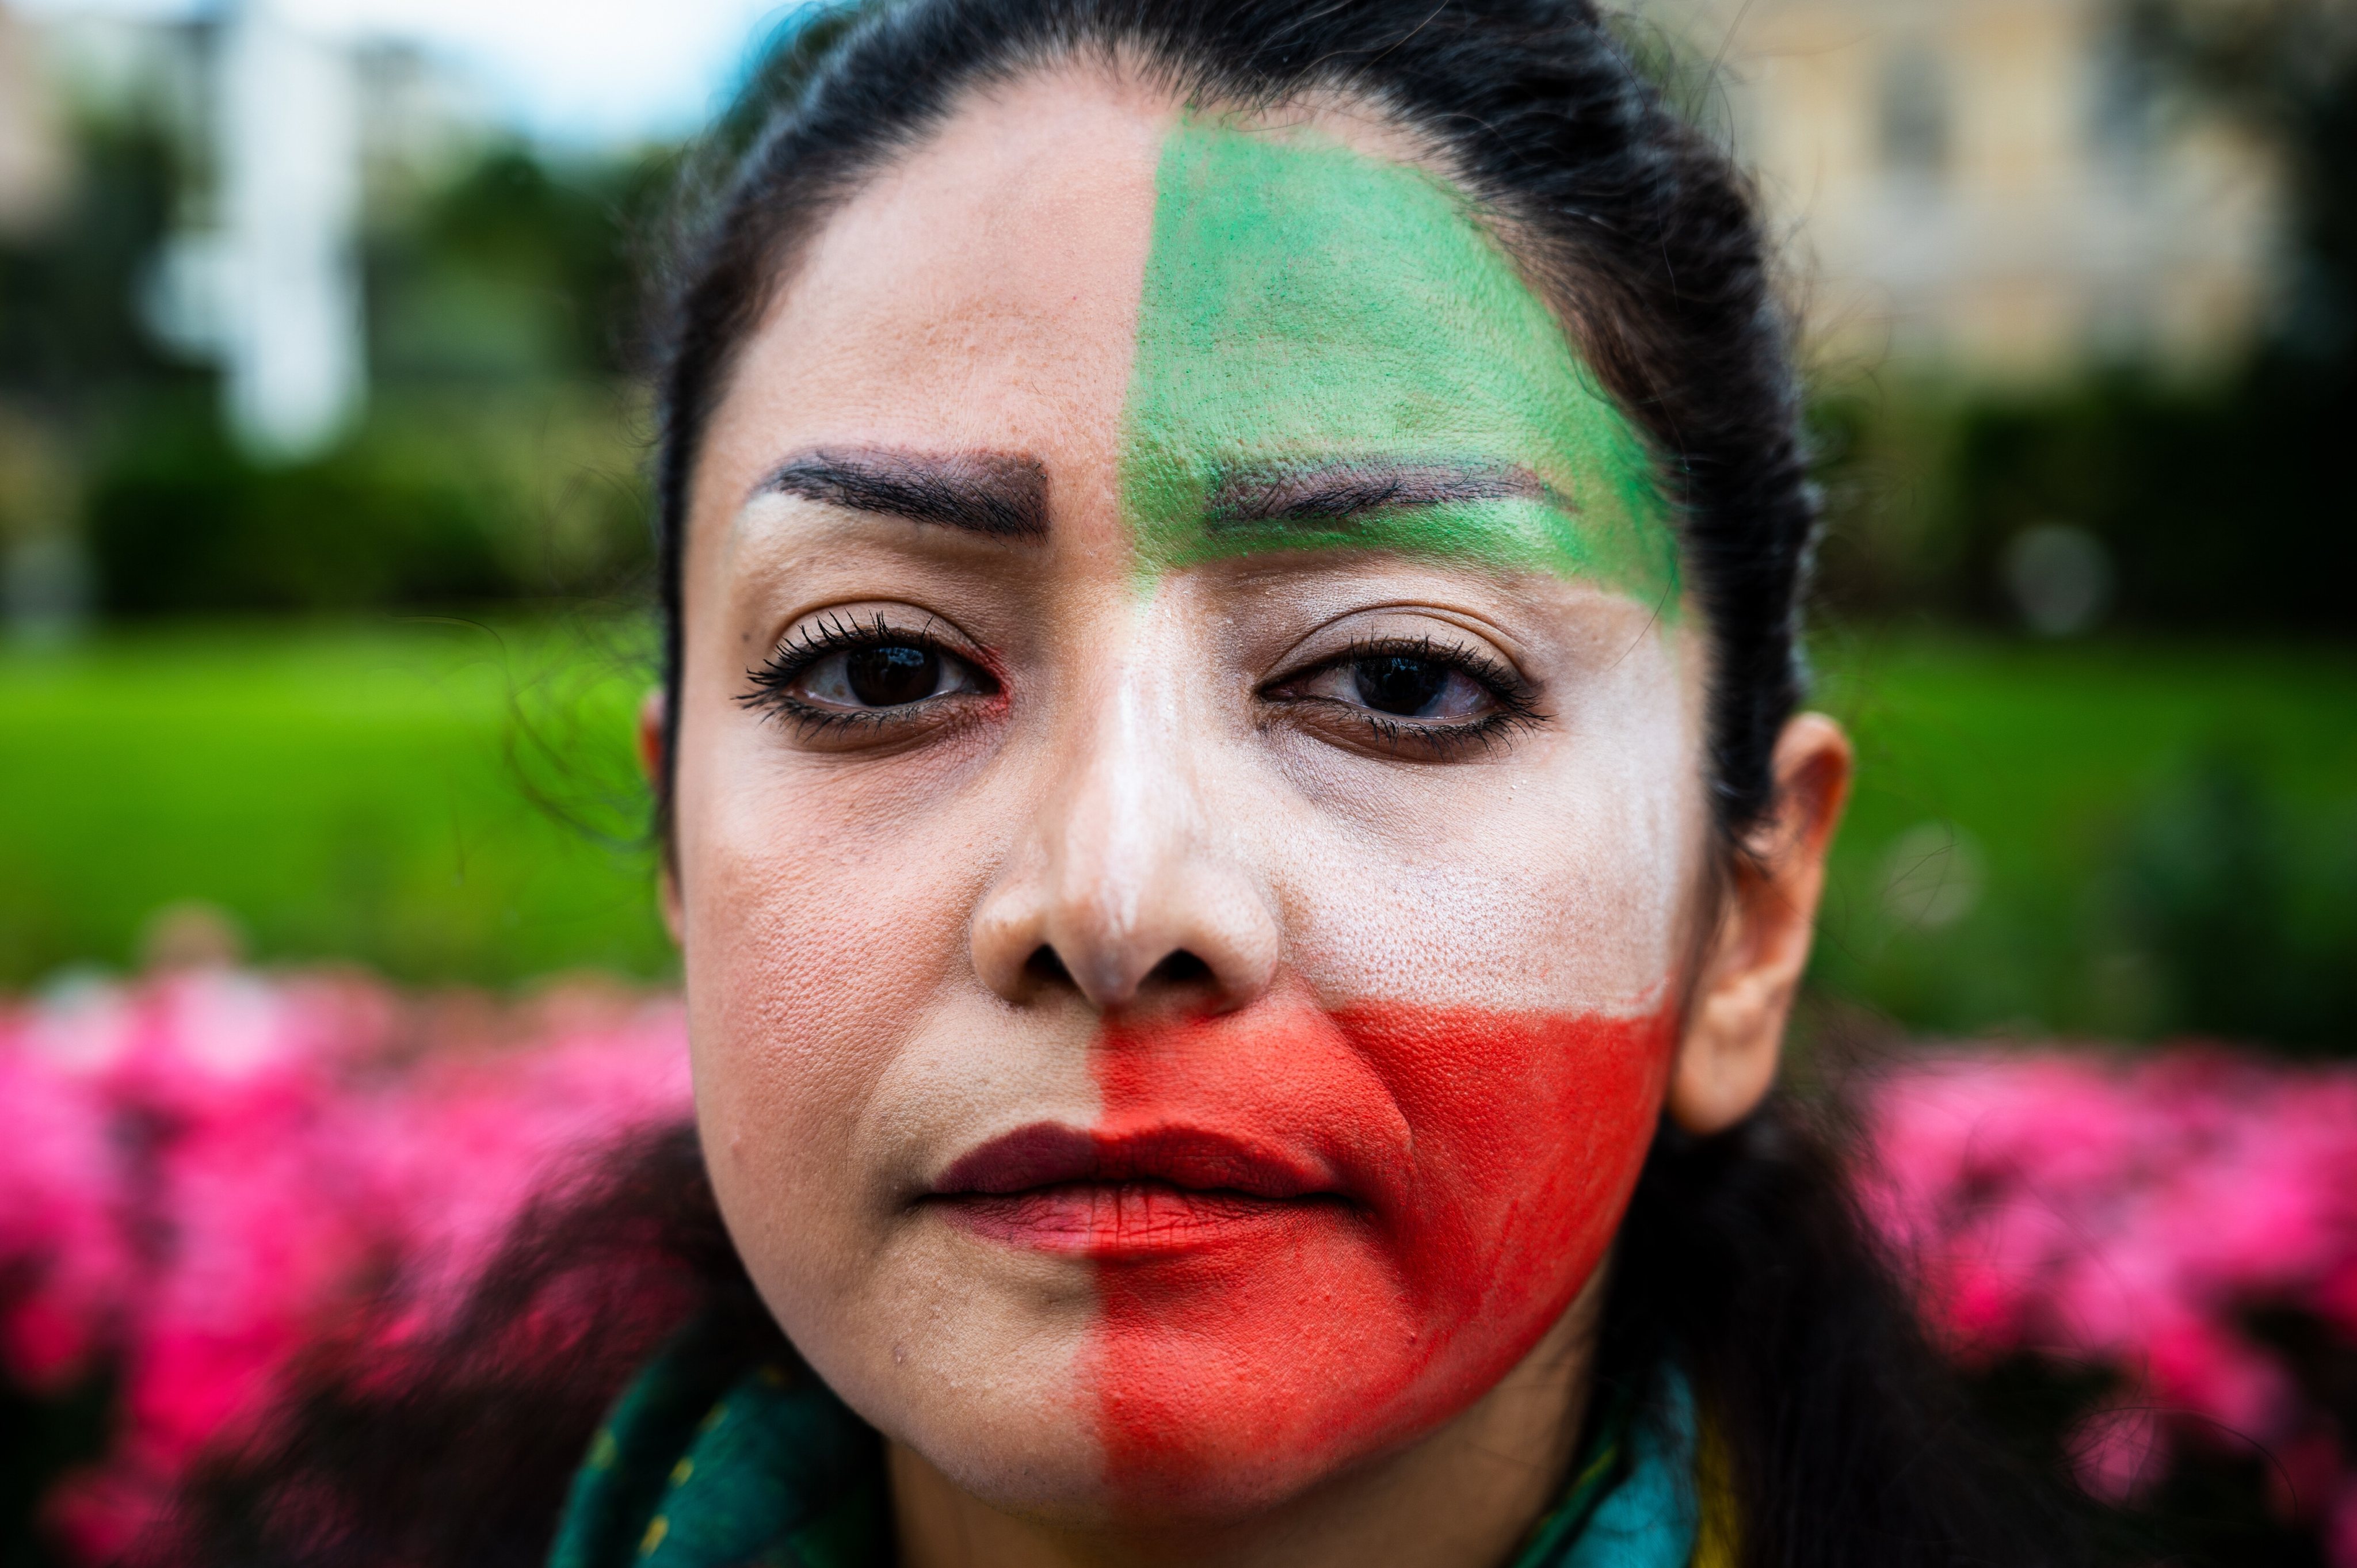 A woman with the flag of Iran painted on her face posing for